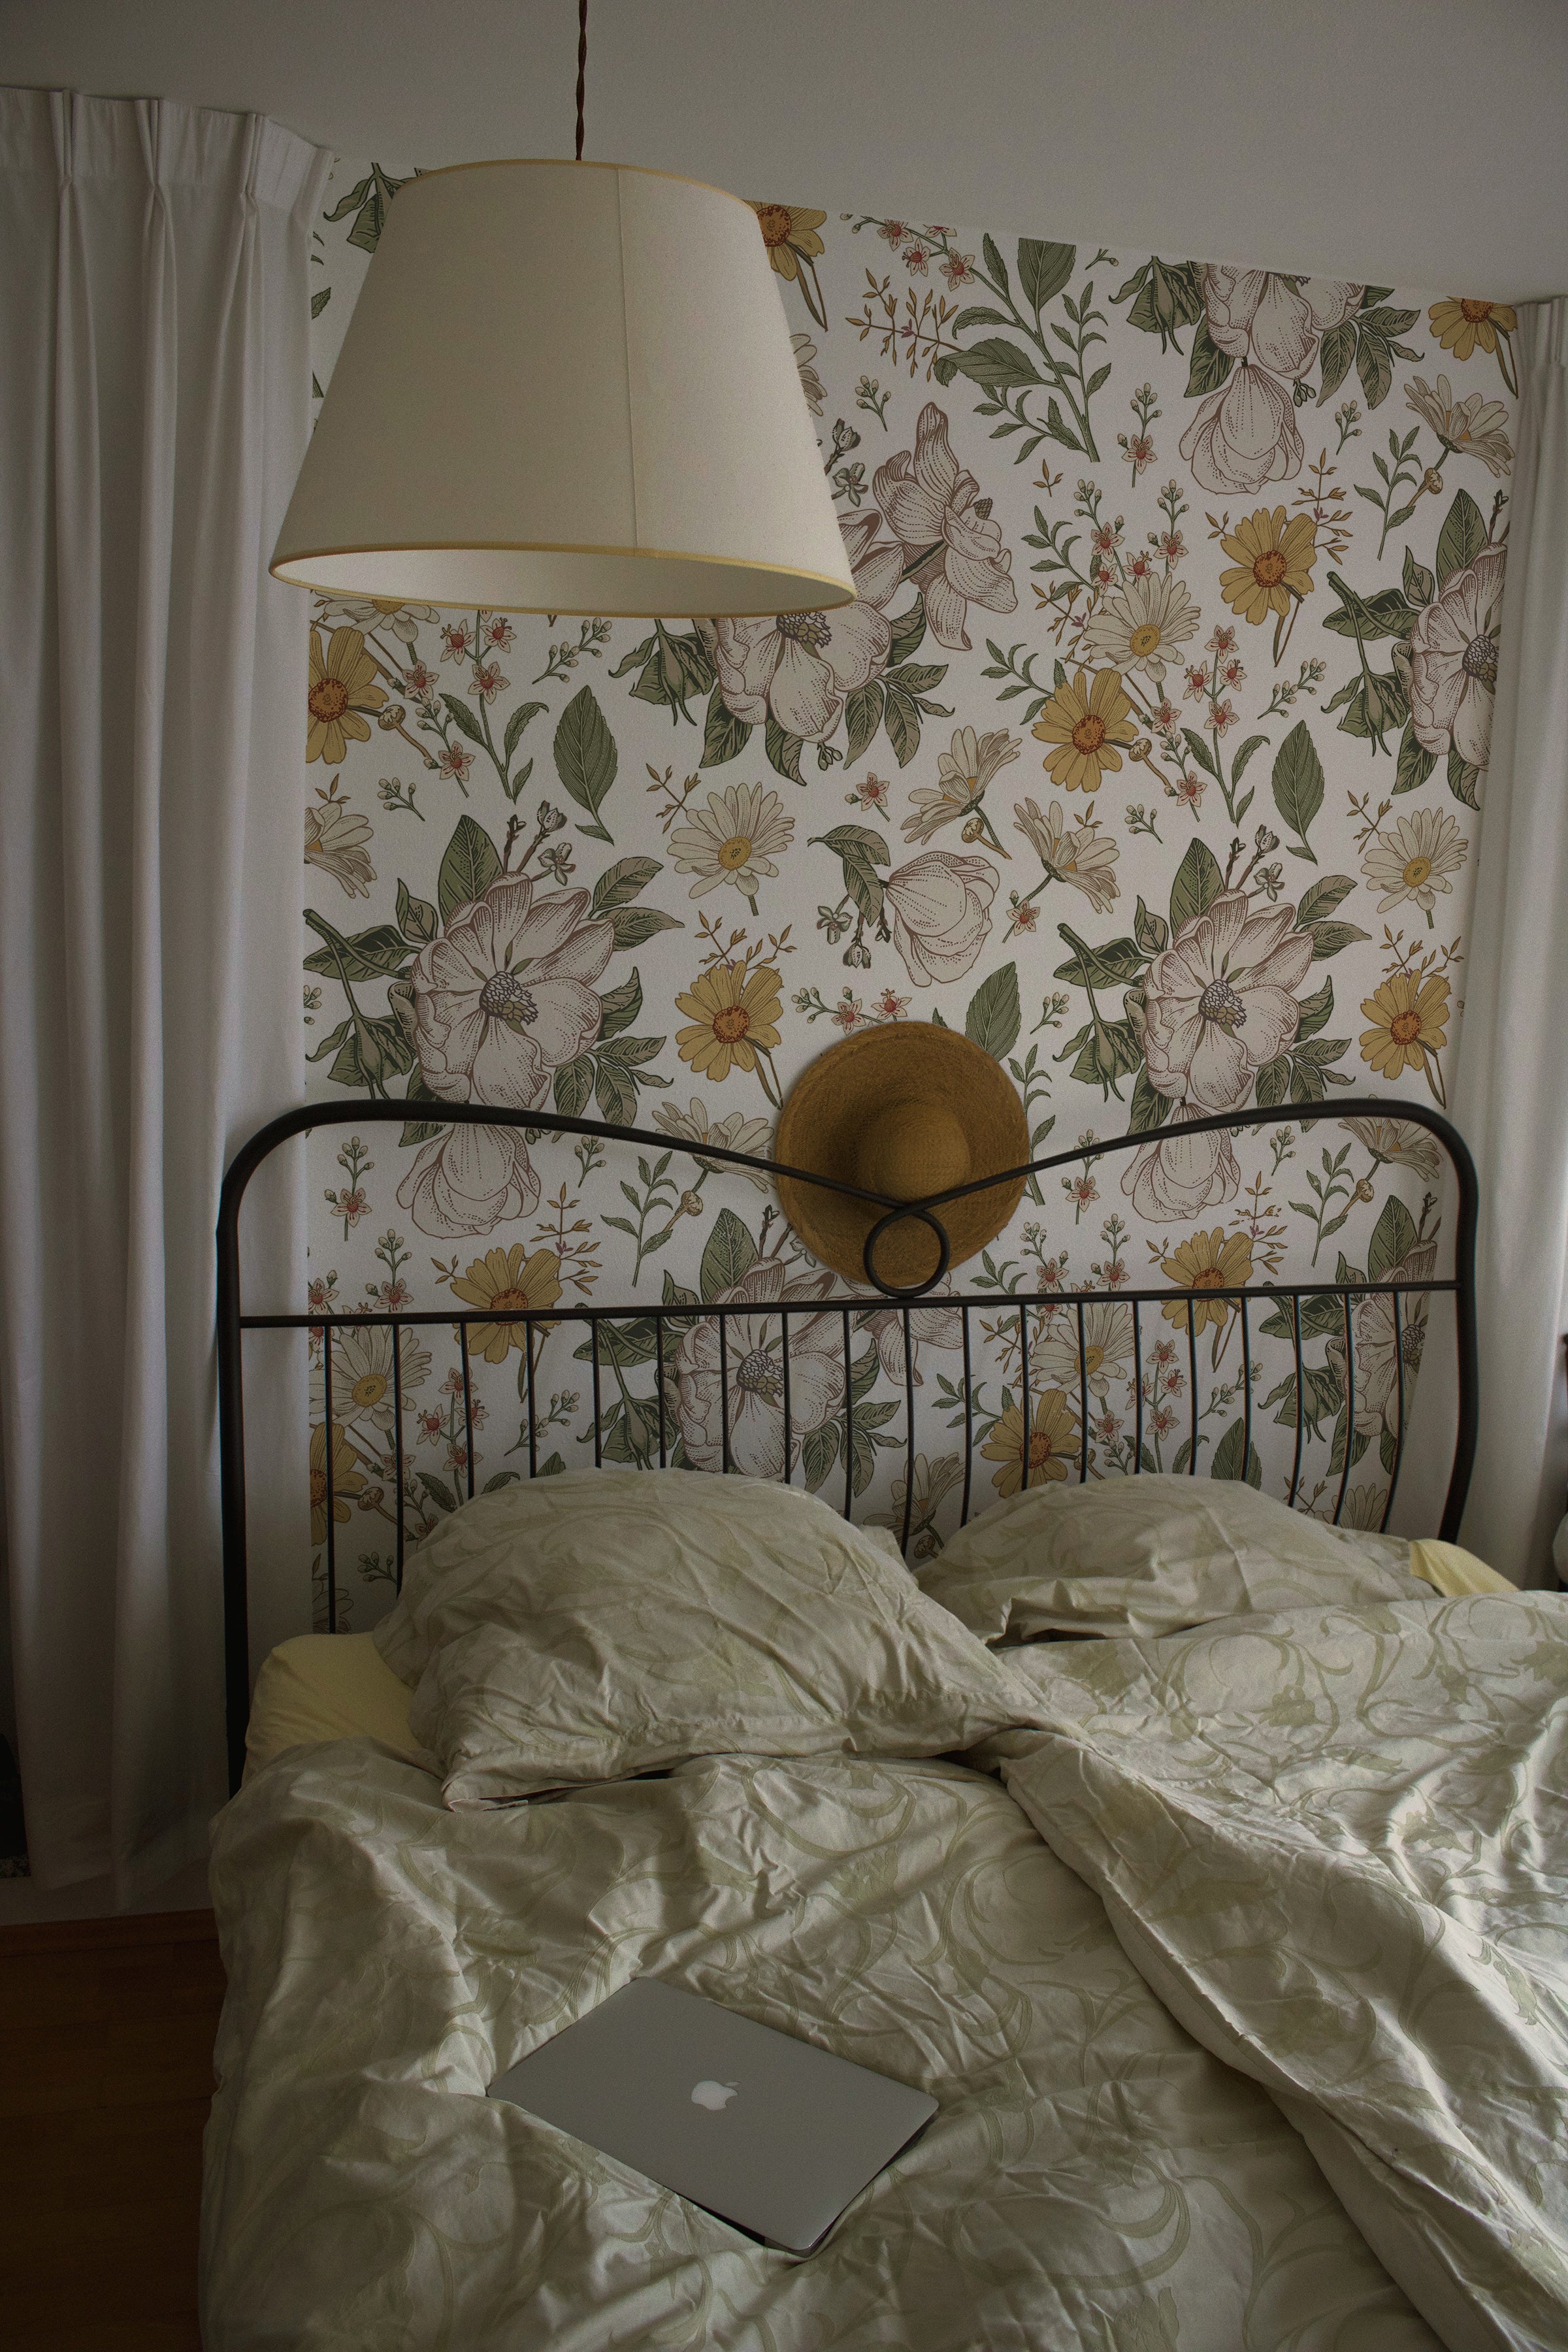 a bedroom scene where the "Floral Wallpaper - Sunny II" adds a bright and cheerful background. The playful yet elegant pattern brings a sense of joy and serenity to the bedroom, pairing beautifully with the simple bedding and natural textures.